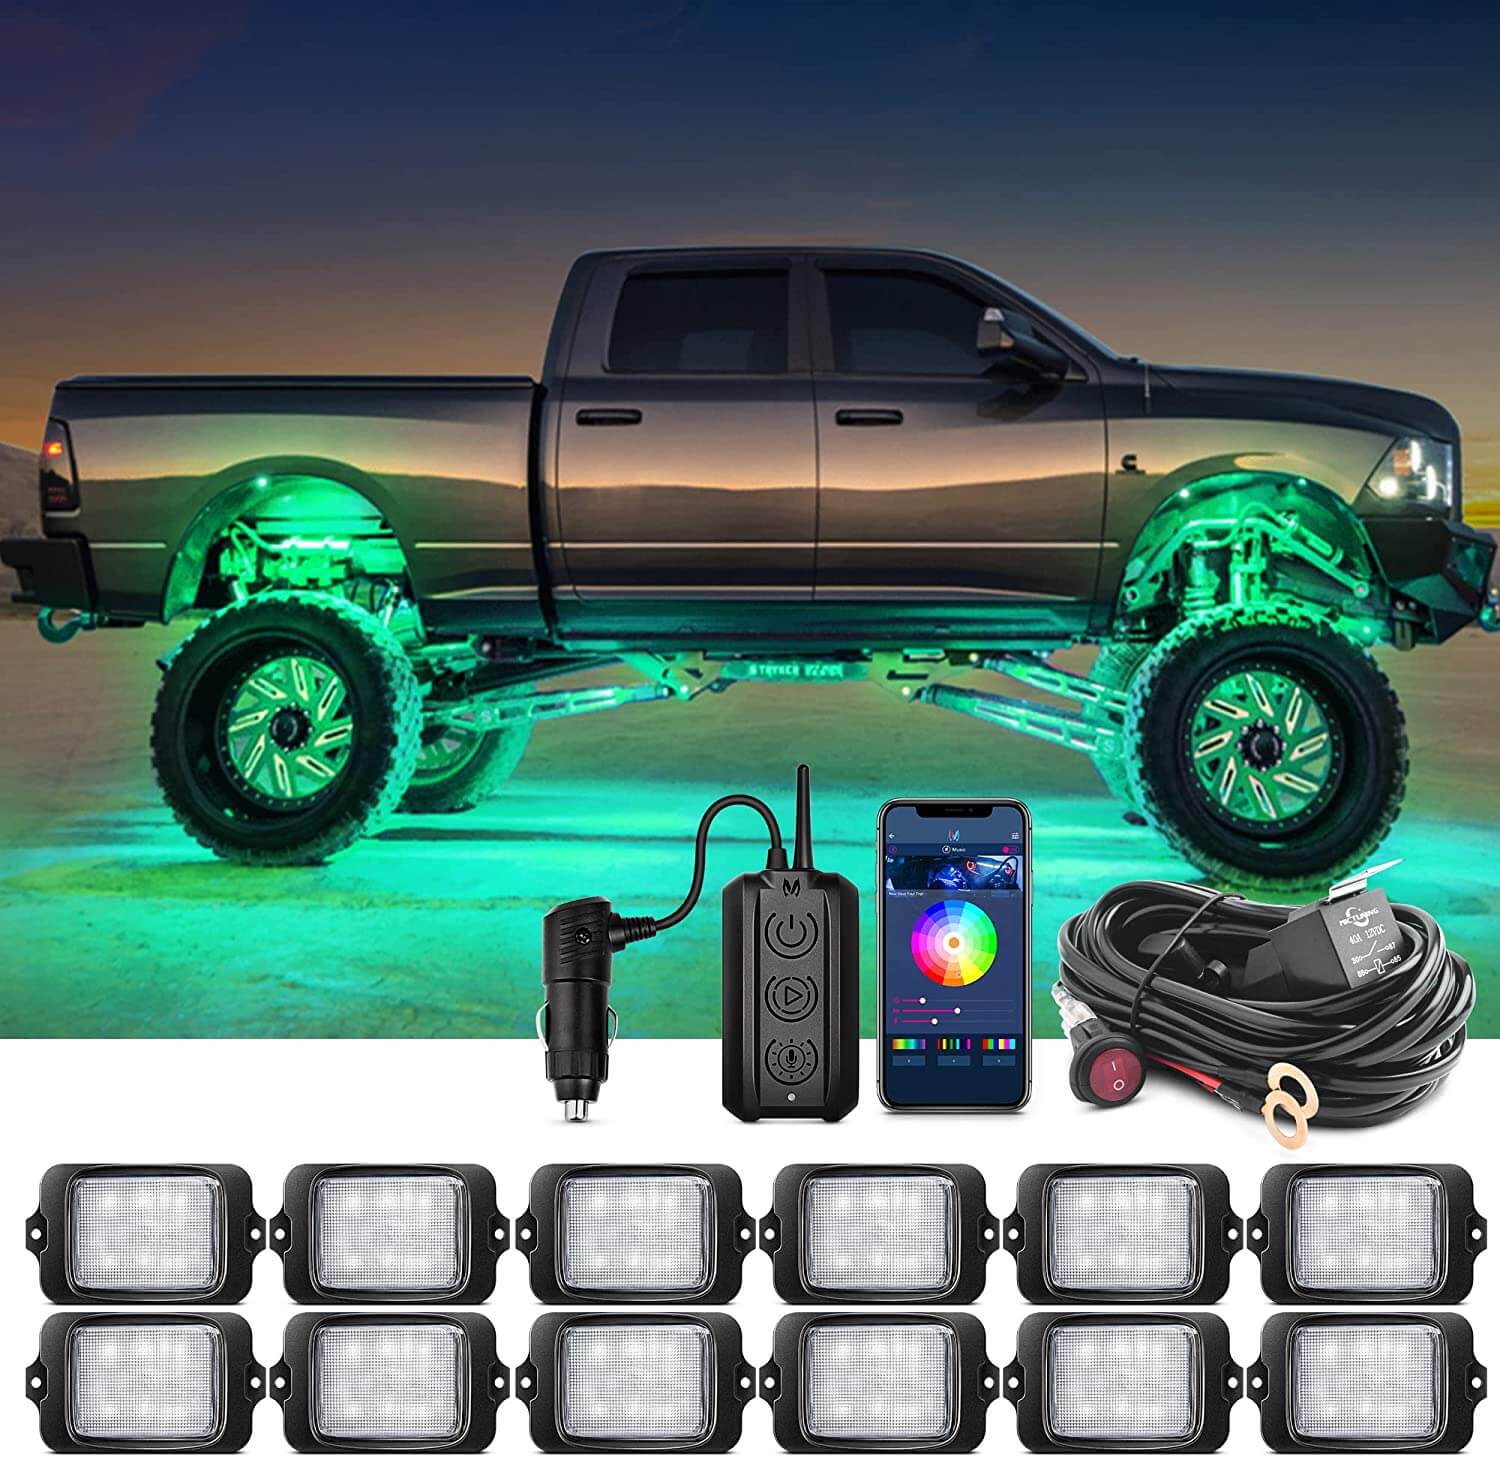 C3 Extensible RGBW LED Rock Lights - 12 Pods Wireless Control Multi-Color Neon Underglow Lights